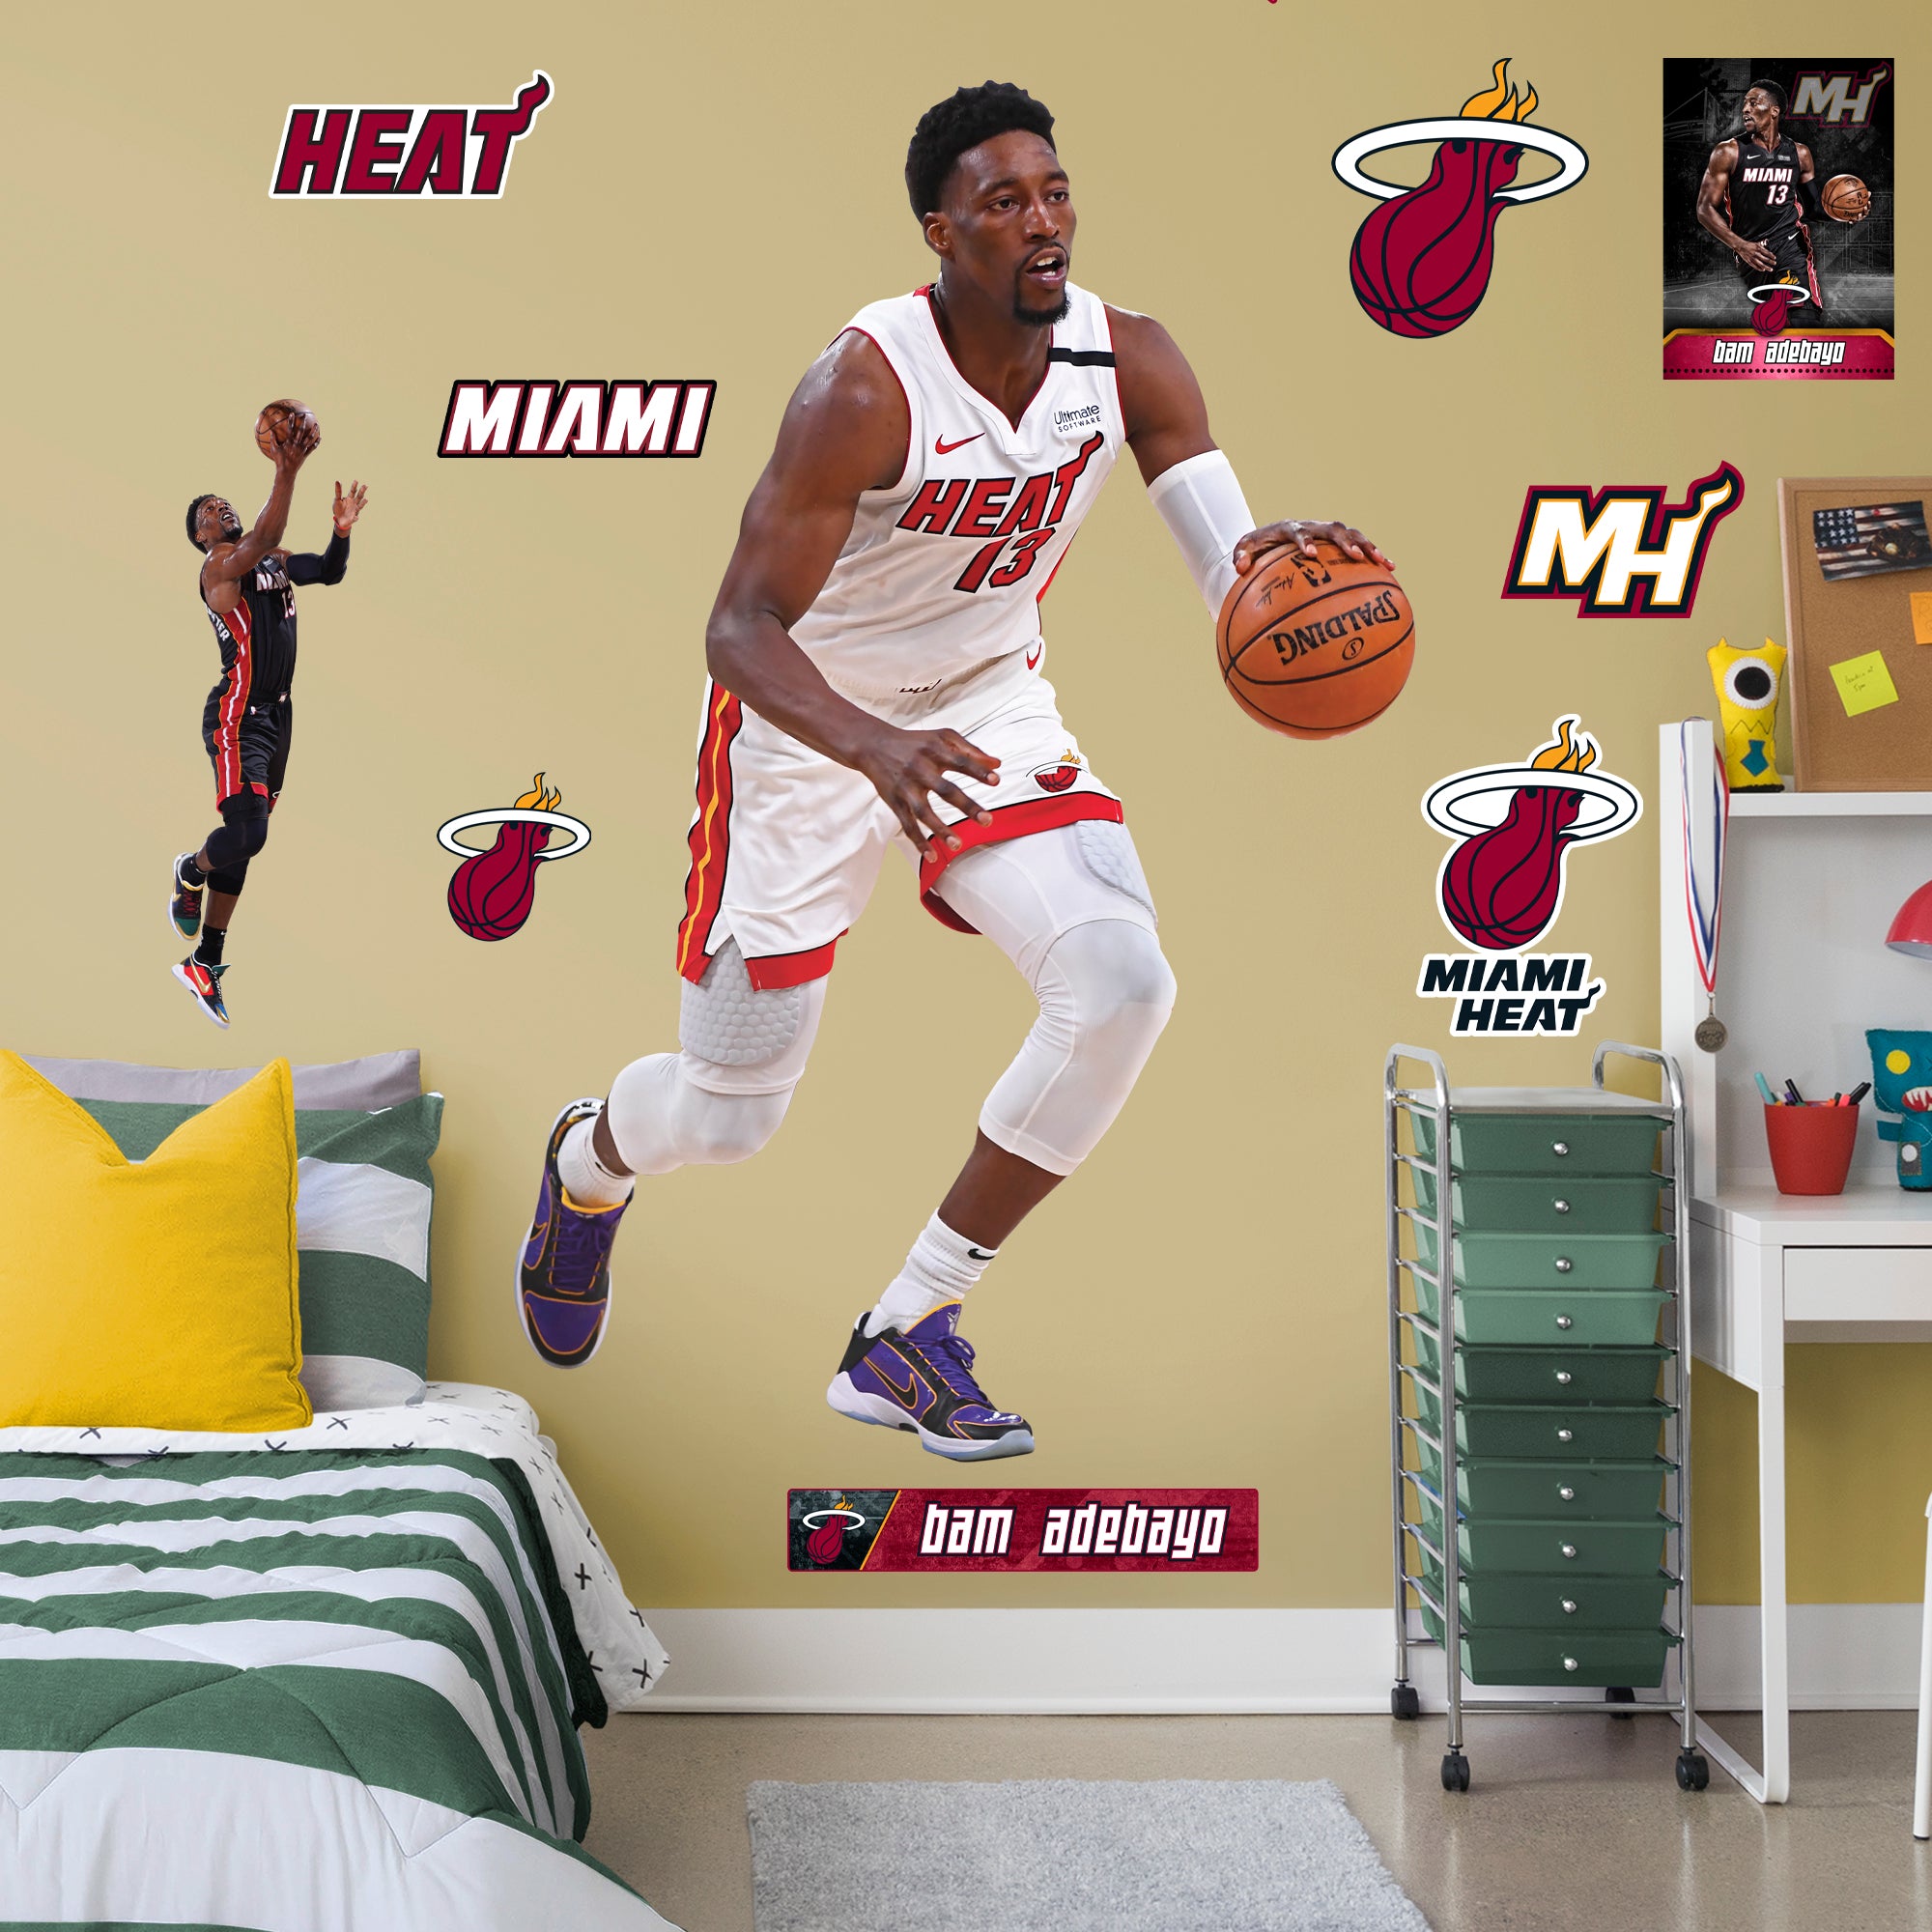 Bam Adebayo for Miami Heat - Officially Licensed NBA Removable Wall Decal Life-Size Athlete + 10 Decals by Fathead | Vinyl